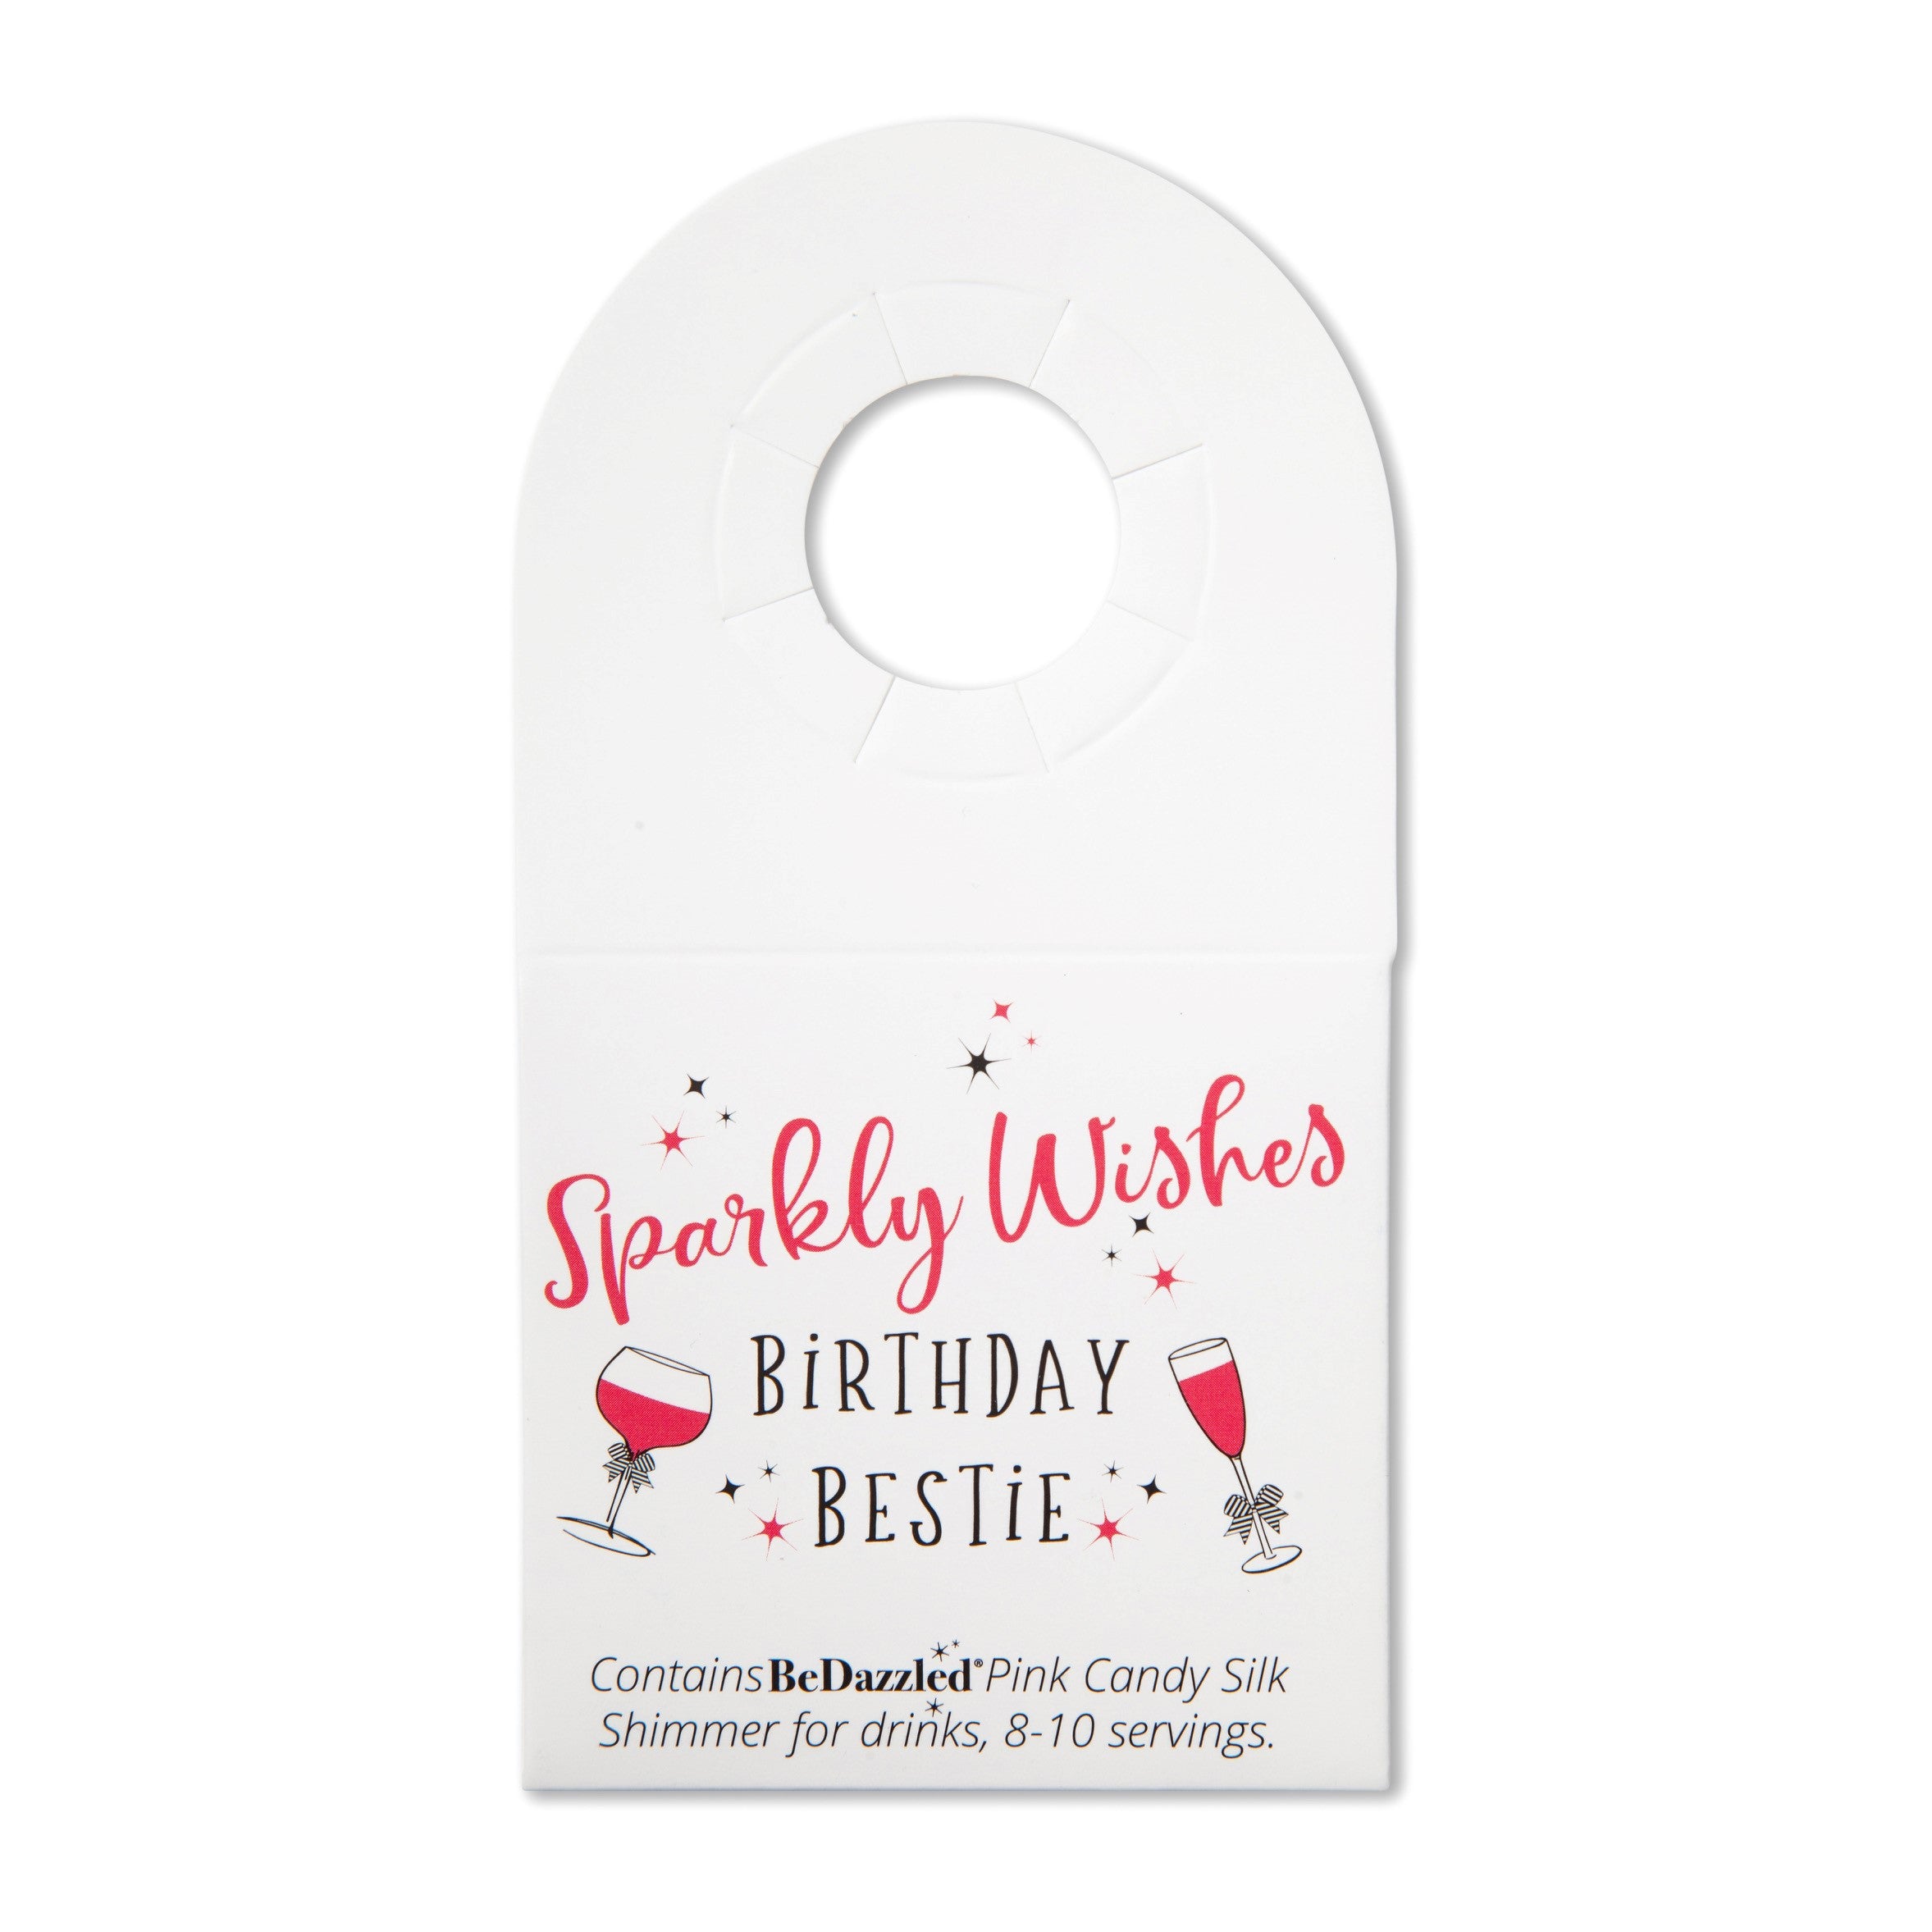 Sparkly Wishes Birthday Bestie - bottle neck gift tag containing PINK CANDY shimmer